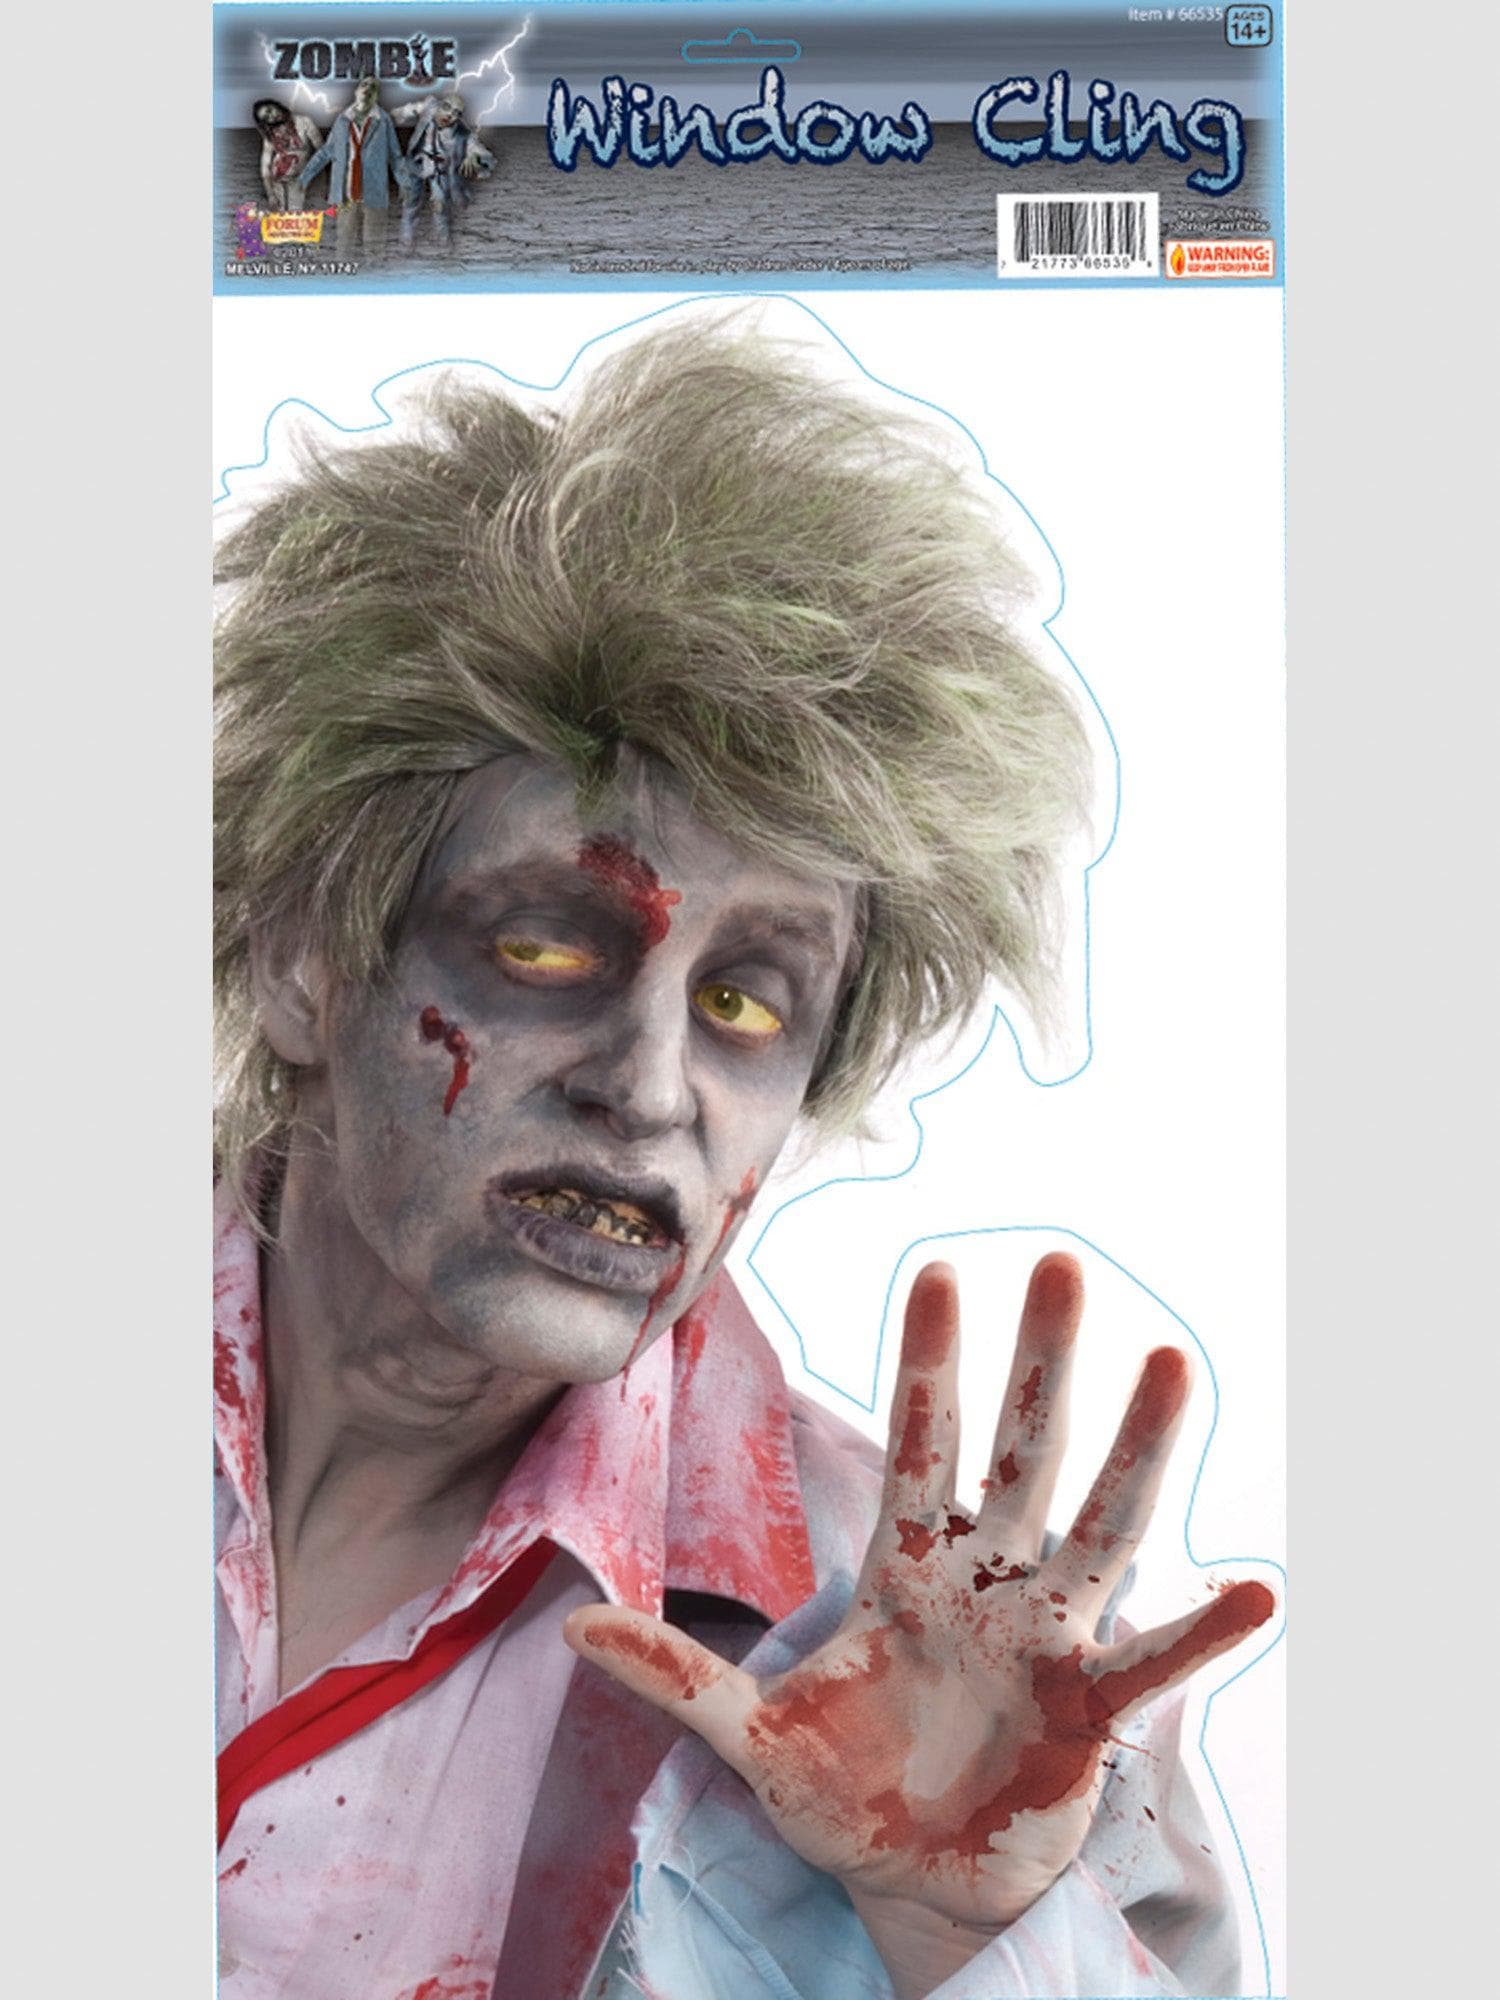 19-inch Peeping Zombie Removable Sticker - costumes.com